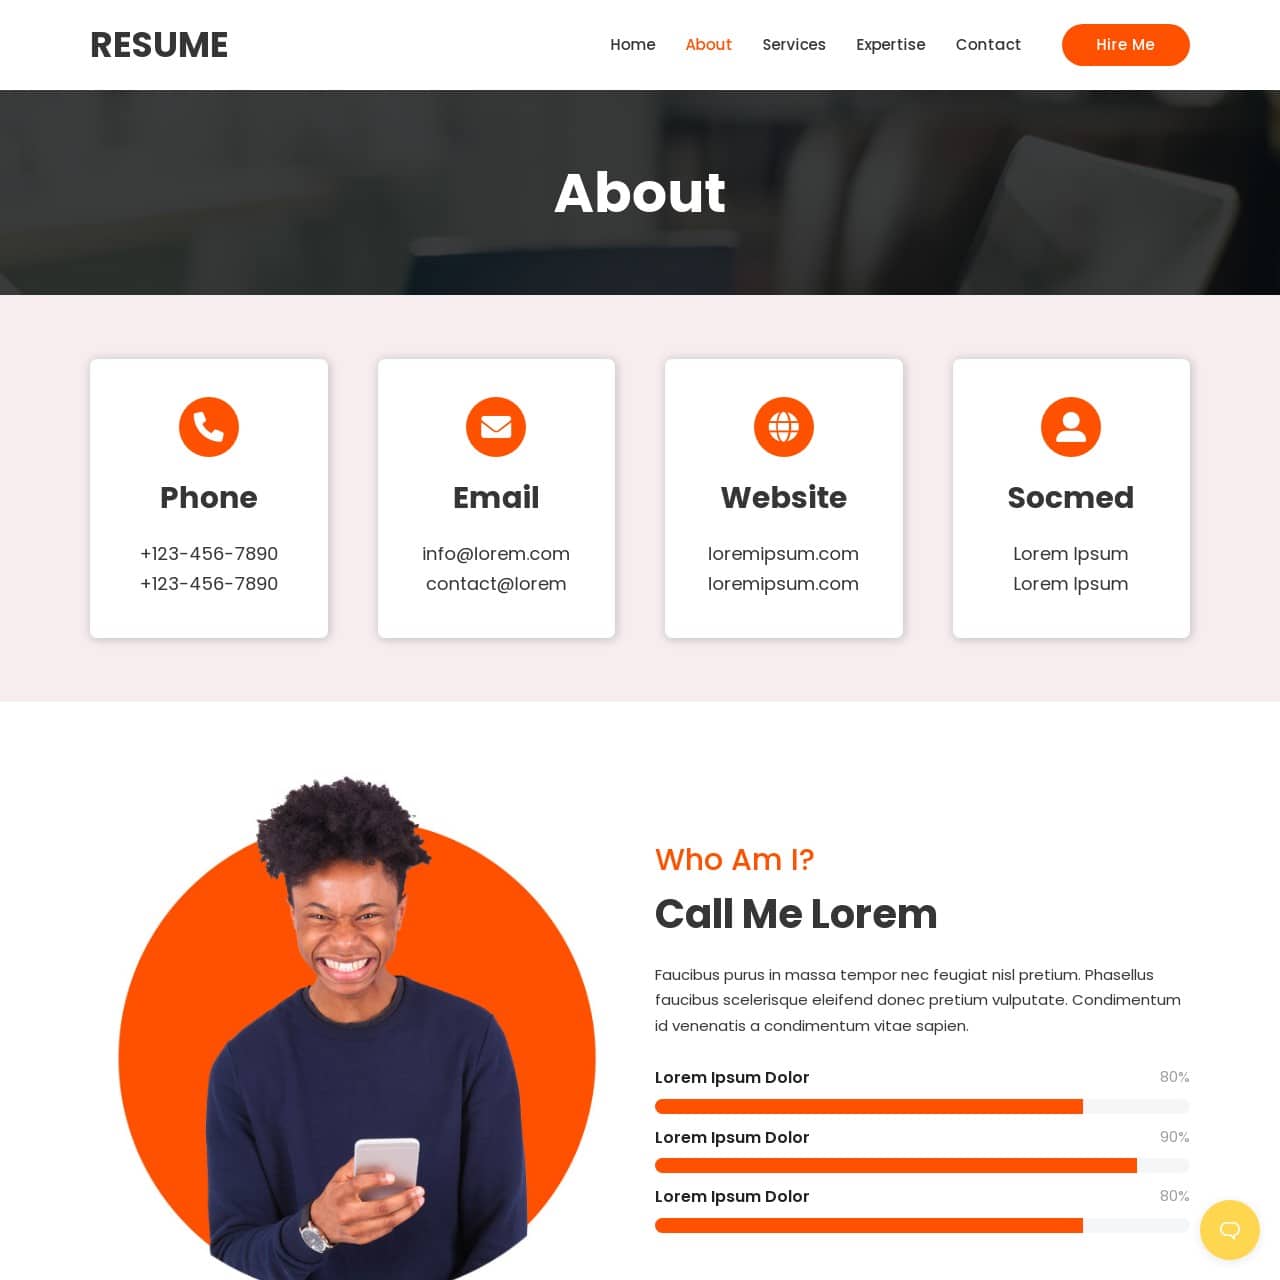 Resume Template - About Page